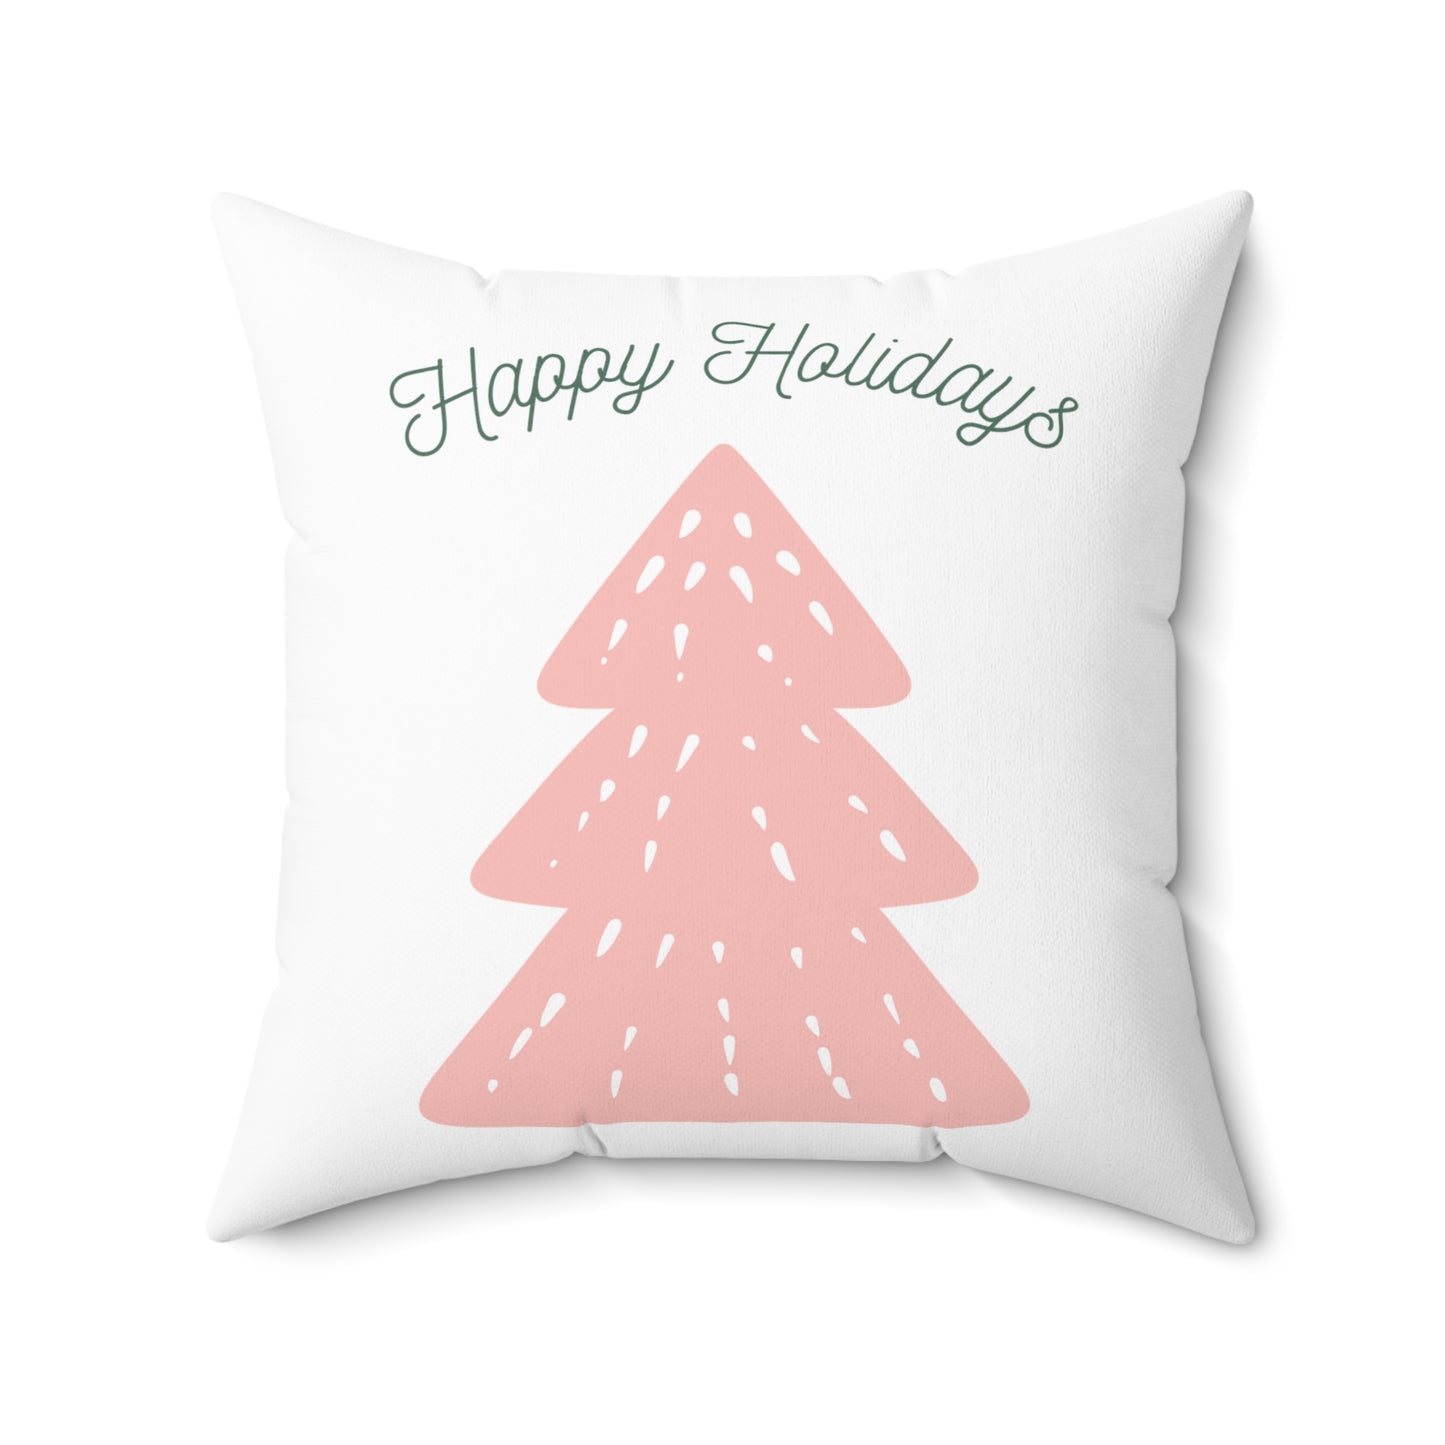 Happy Holidays Printed Polyester Sqaure Pillow, White